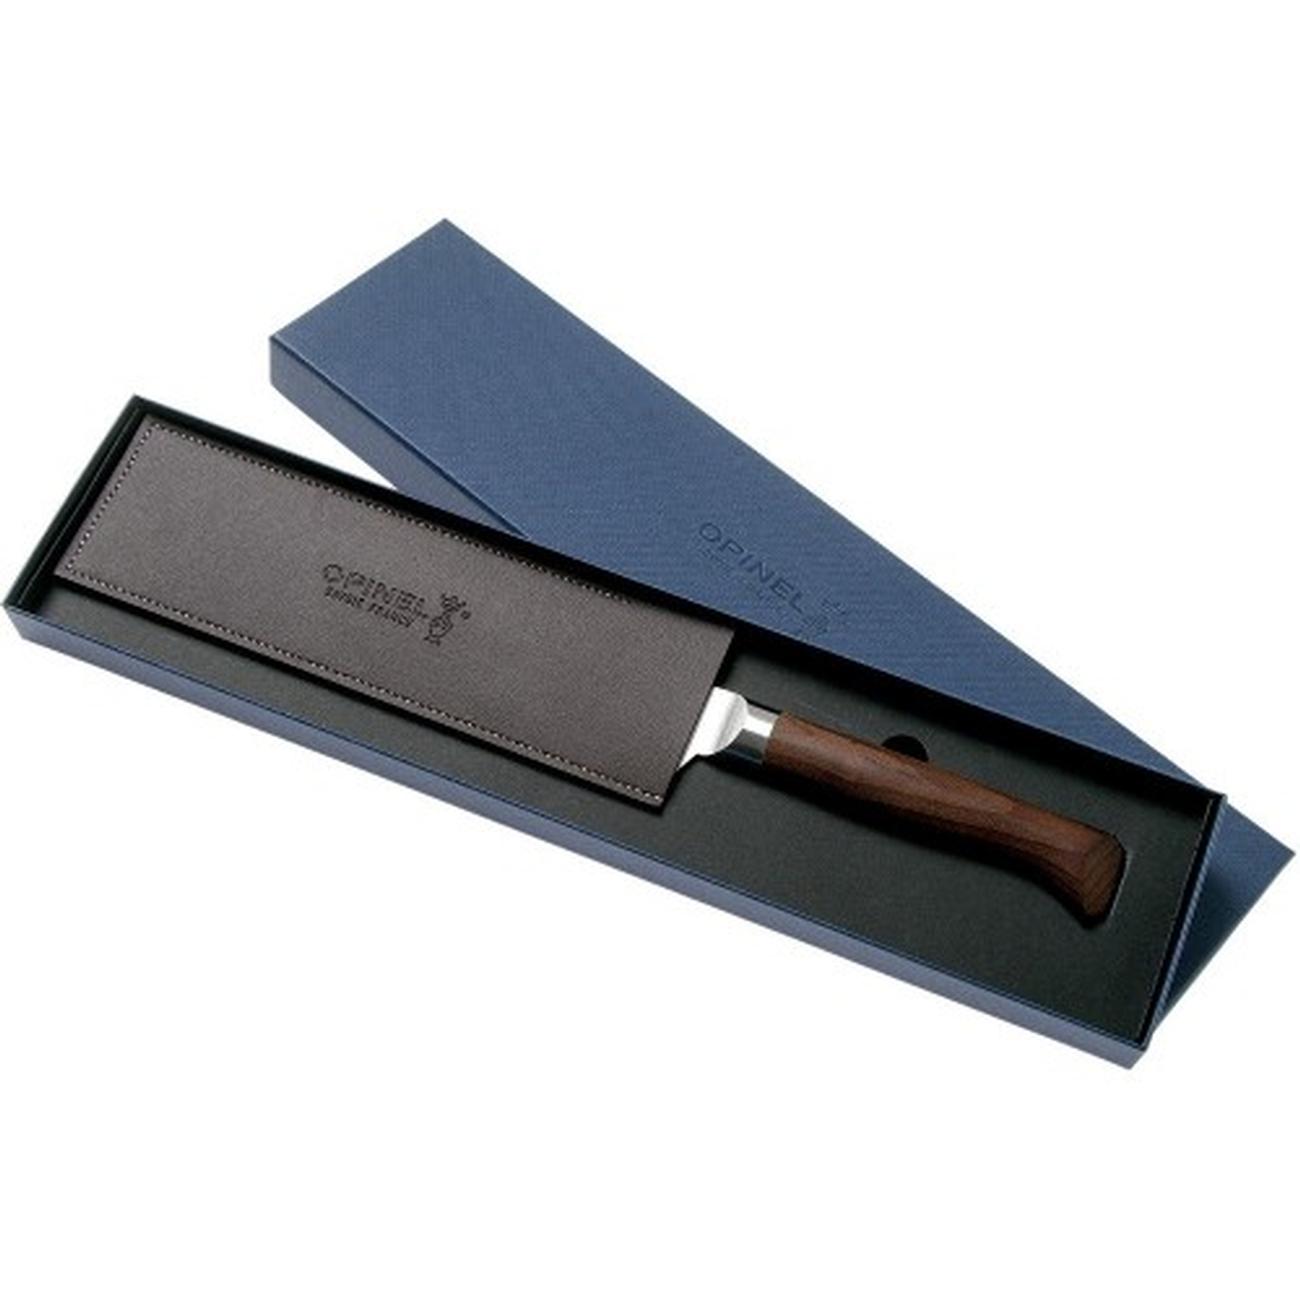 https://www.thekitchenwhisk.ie/contentfiles/productImages/Large/Opinel-Chefs-Knife-20cm-Les-Forges-1890-giftbox-x1200.jpg